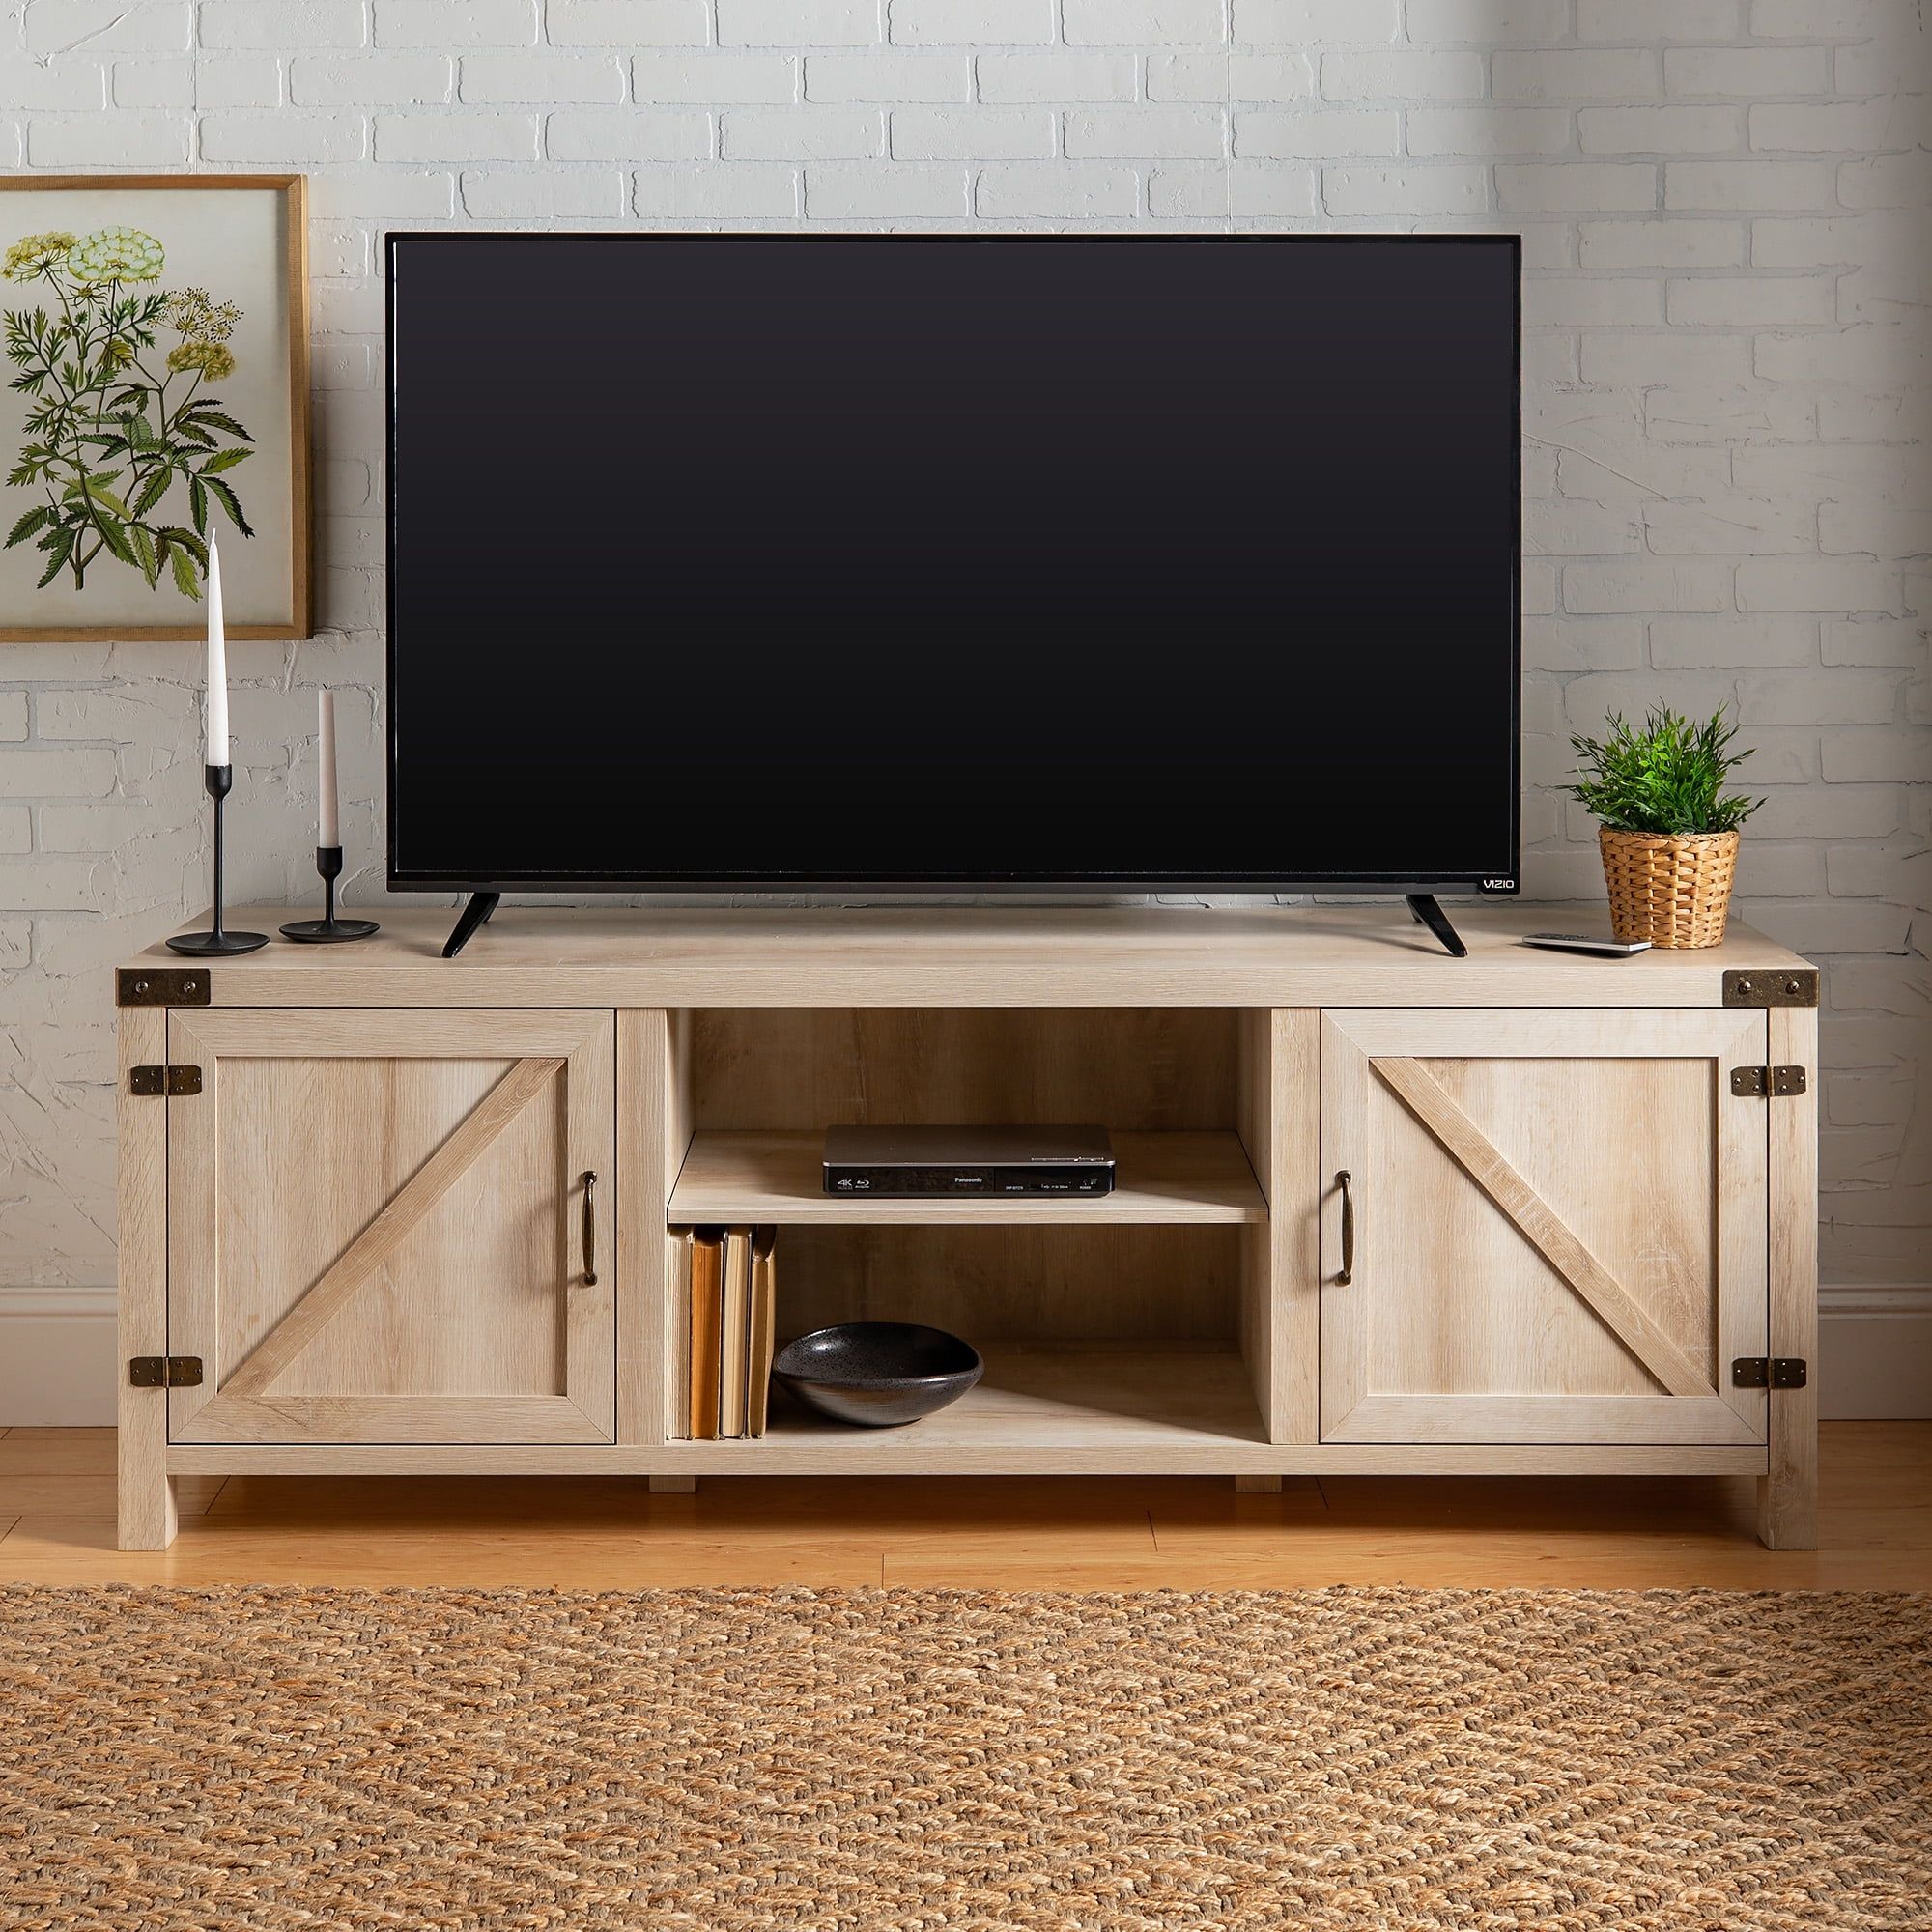 Woven Paths Farmhouse Barn Door Tv Stand For Tvs Up To 80", White Oak Intended For Farmhouse Tv Stands (Gallery 2 of 20)